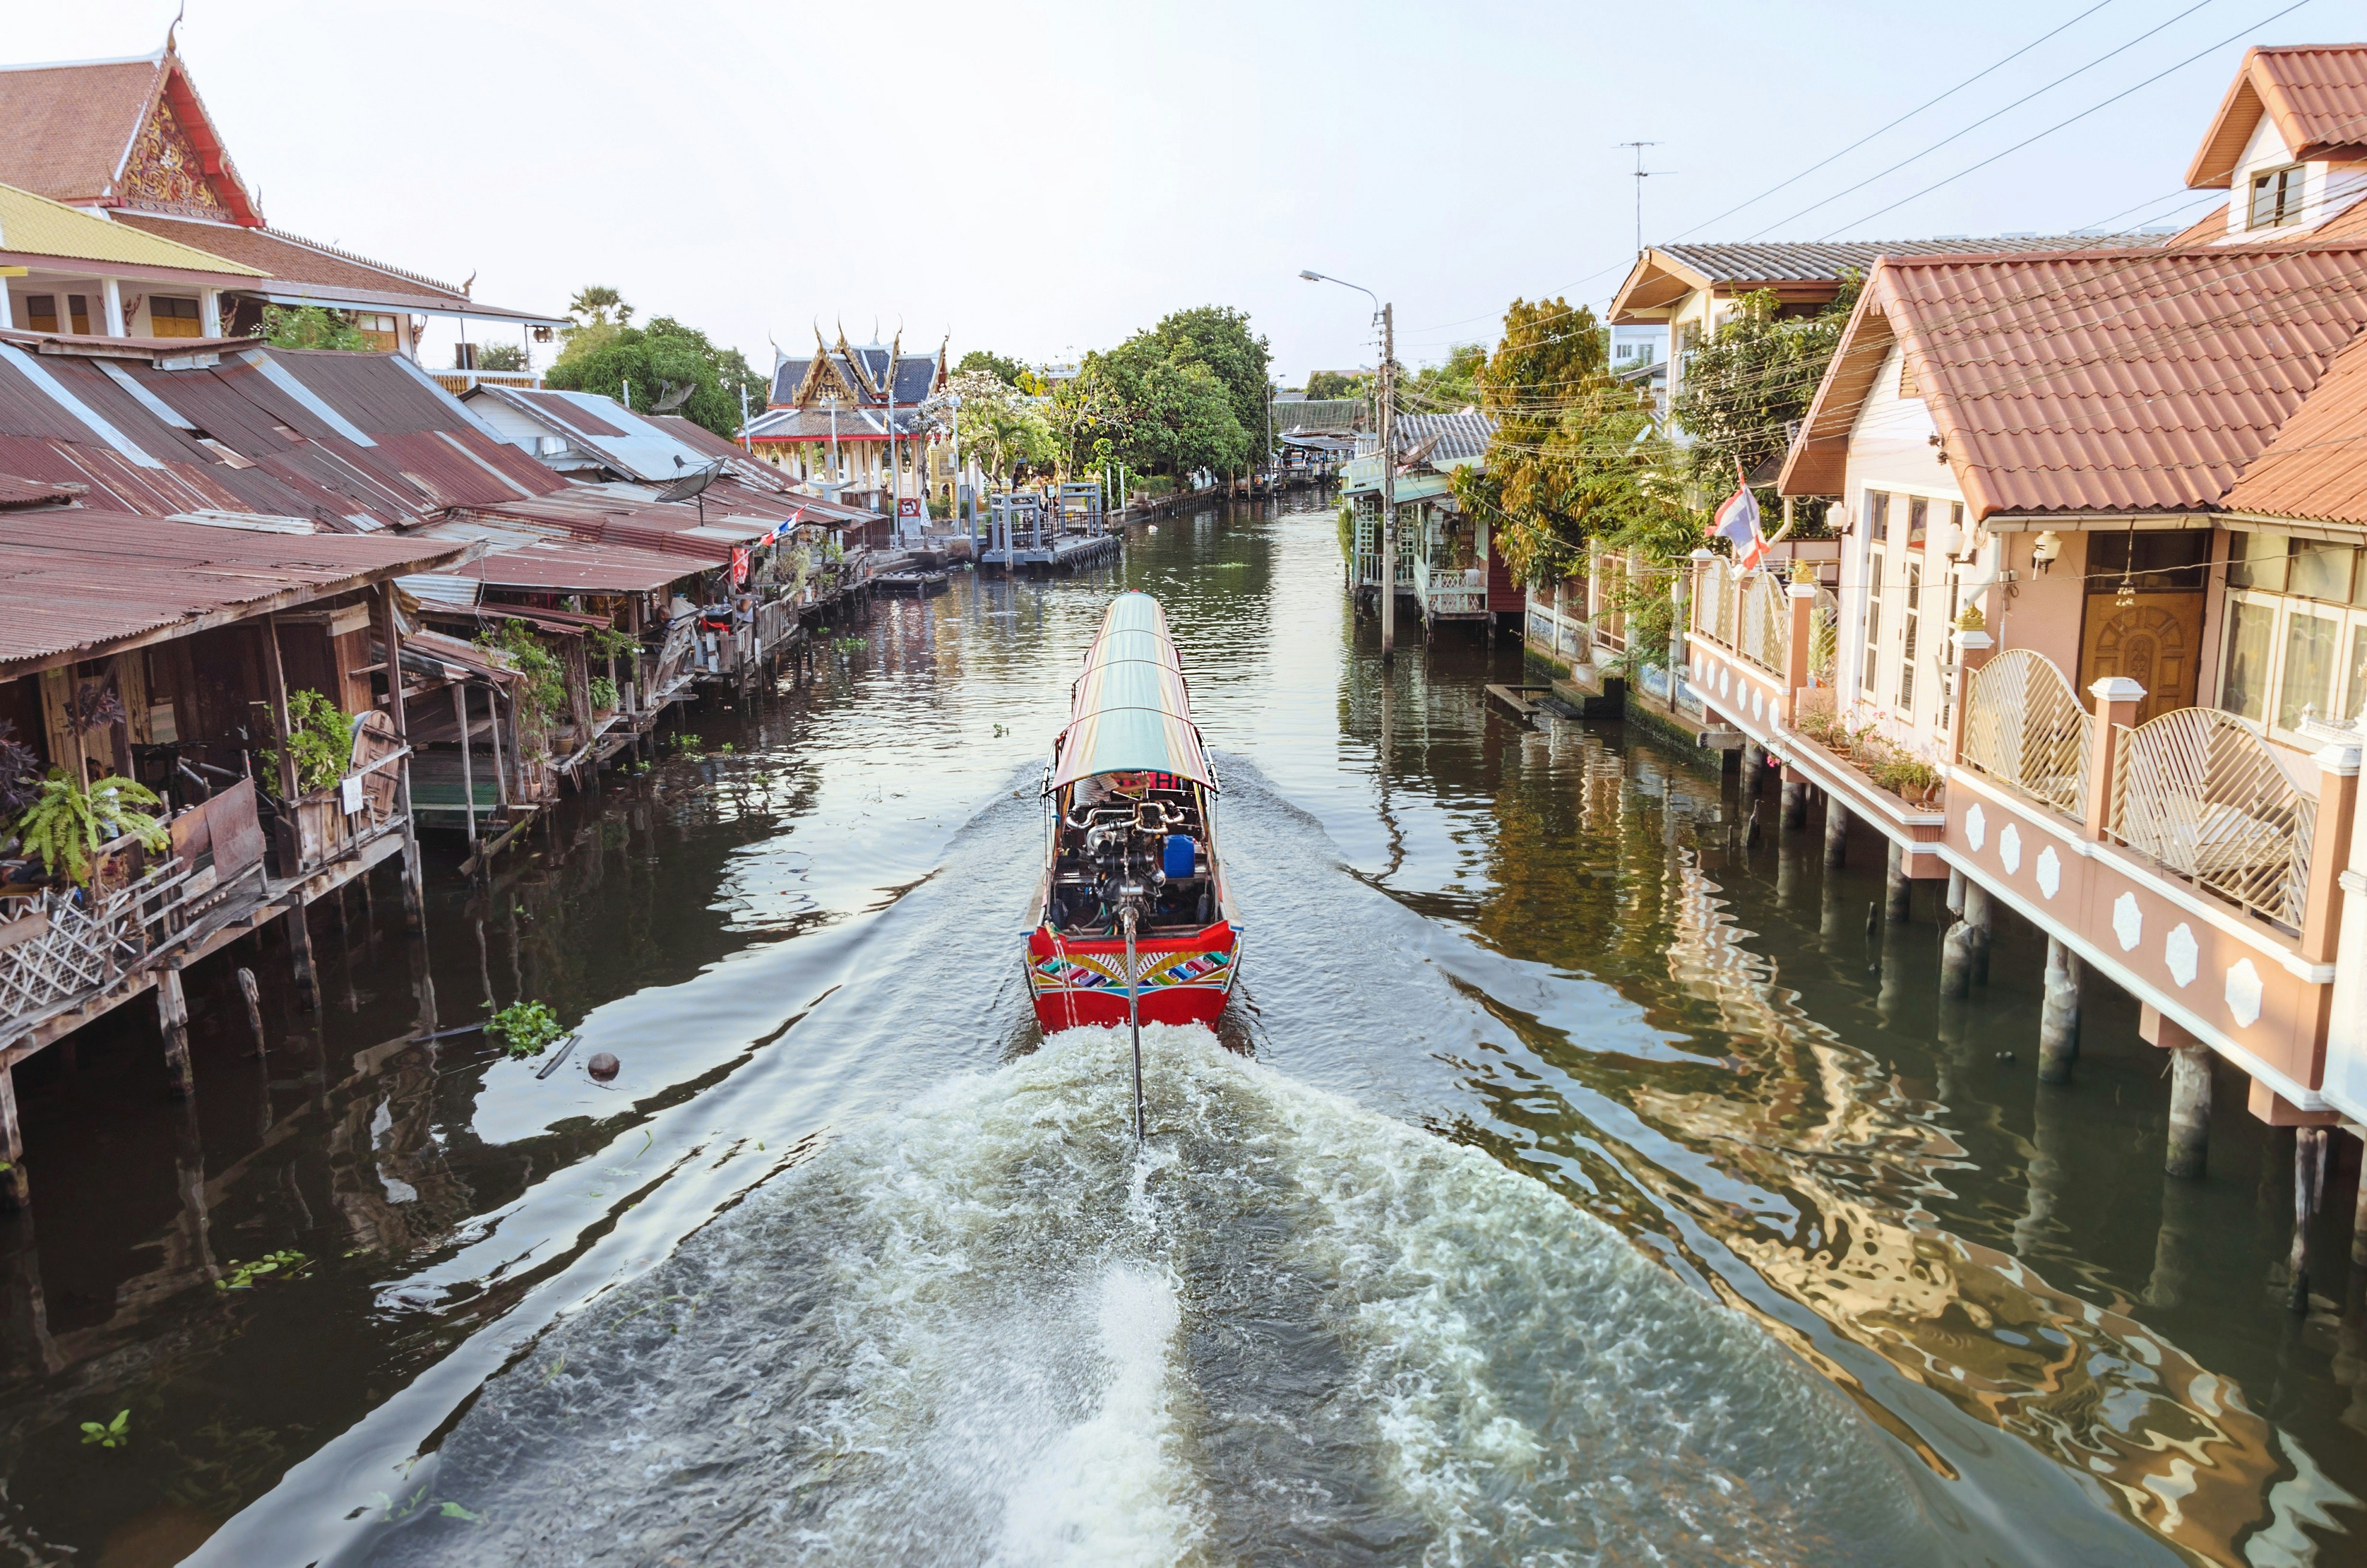 A boat cruises through the centre of a canal in Bangkok. The narrow canal is flanked by wooden houses on stilts above the waterline.